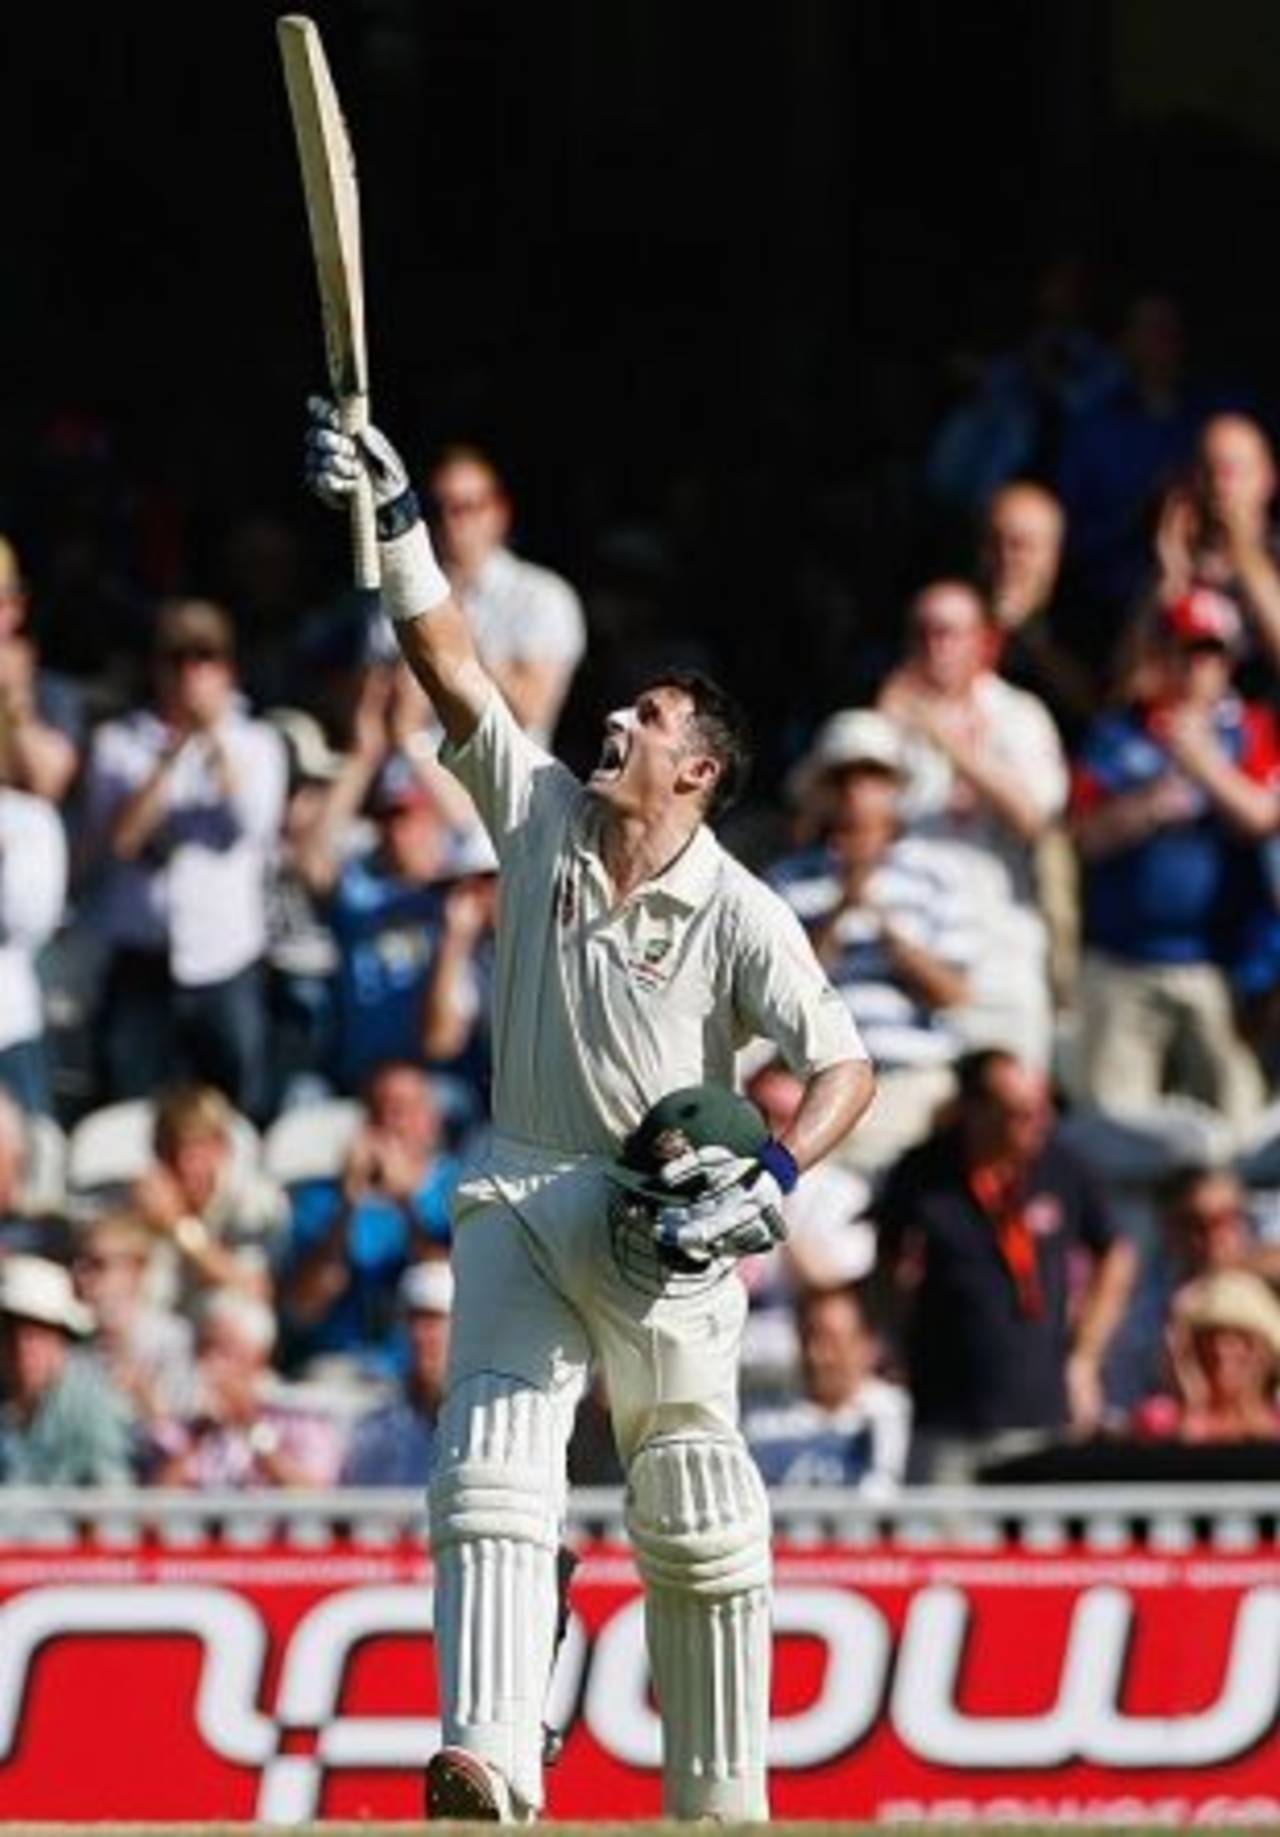 Michael Hussey celebrates his century, England v Australia, 5th Test, The Oval, 4th day, August 23, 2009